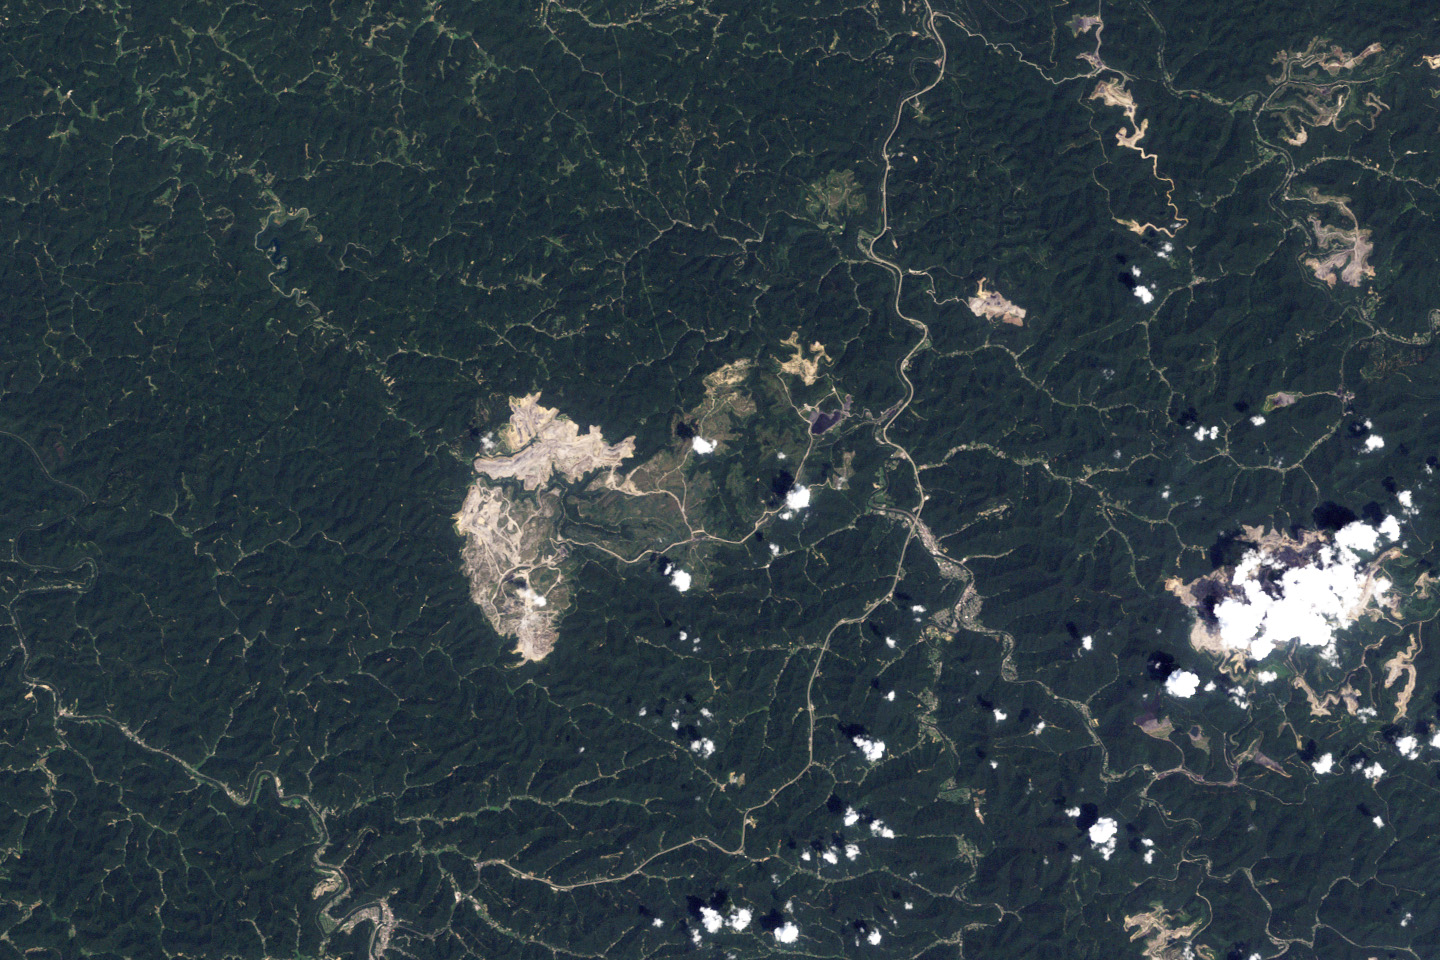 Hobet Mine, West Virginia - related image preview